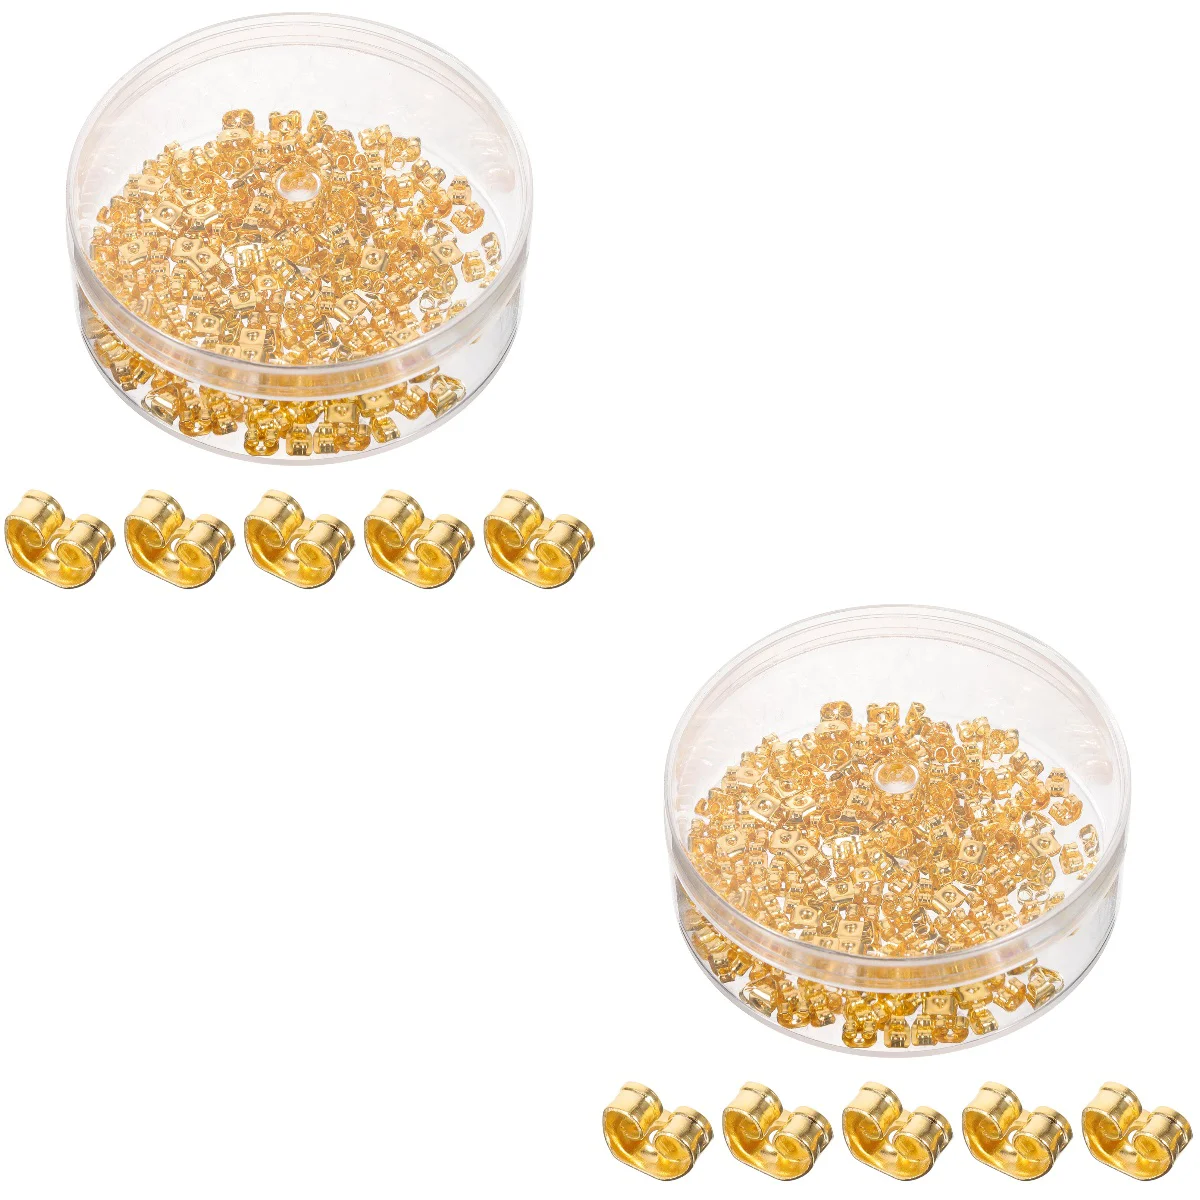 

Earring Backs Replacements Heavy Backings Stoppers Droopy Ears Studs Metal Earrings Small